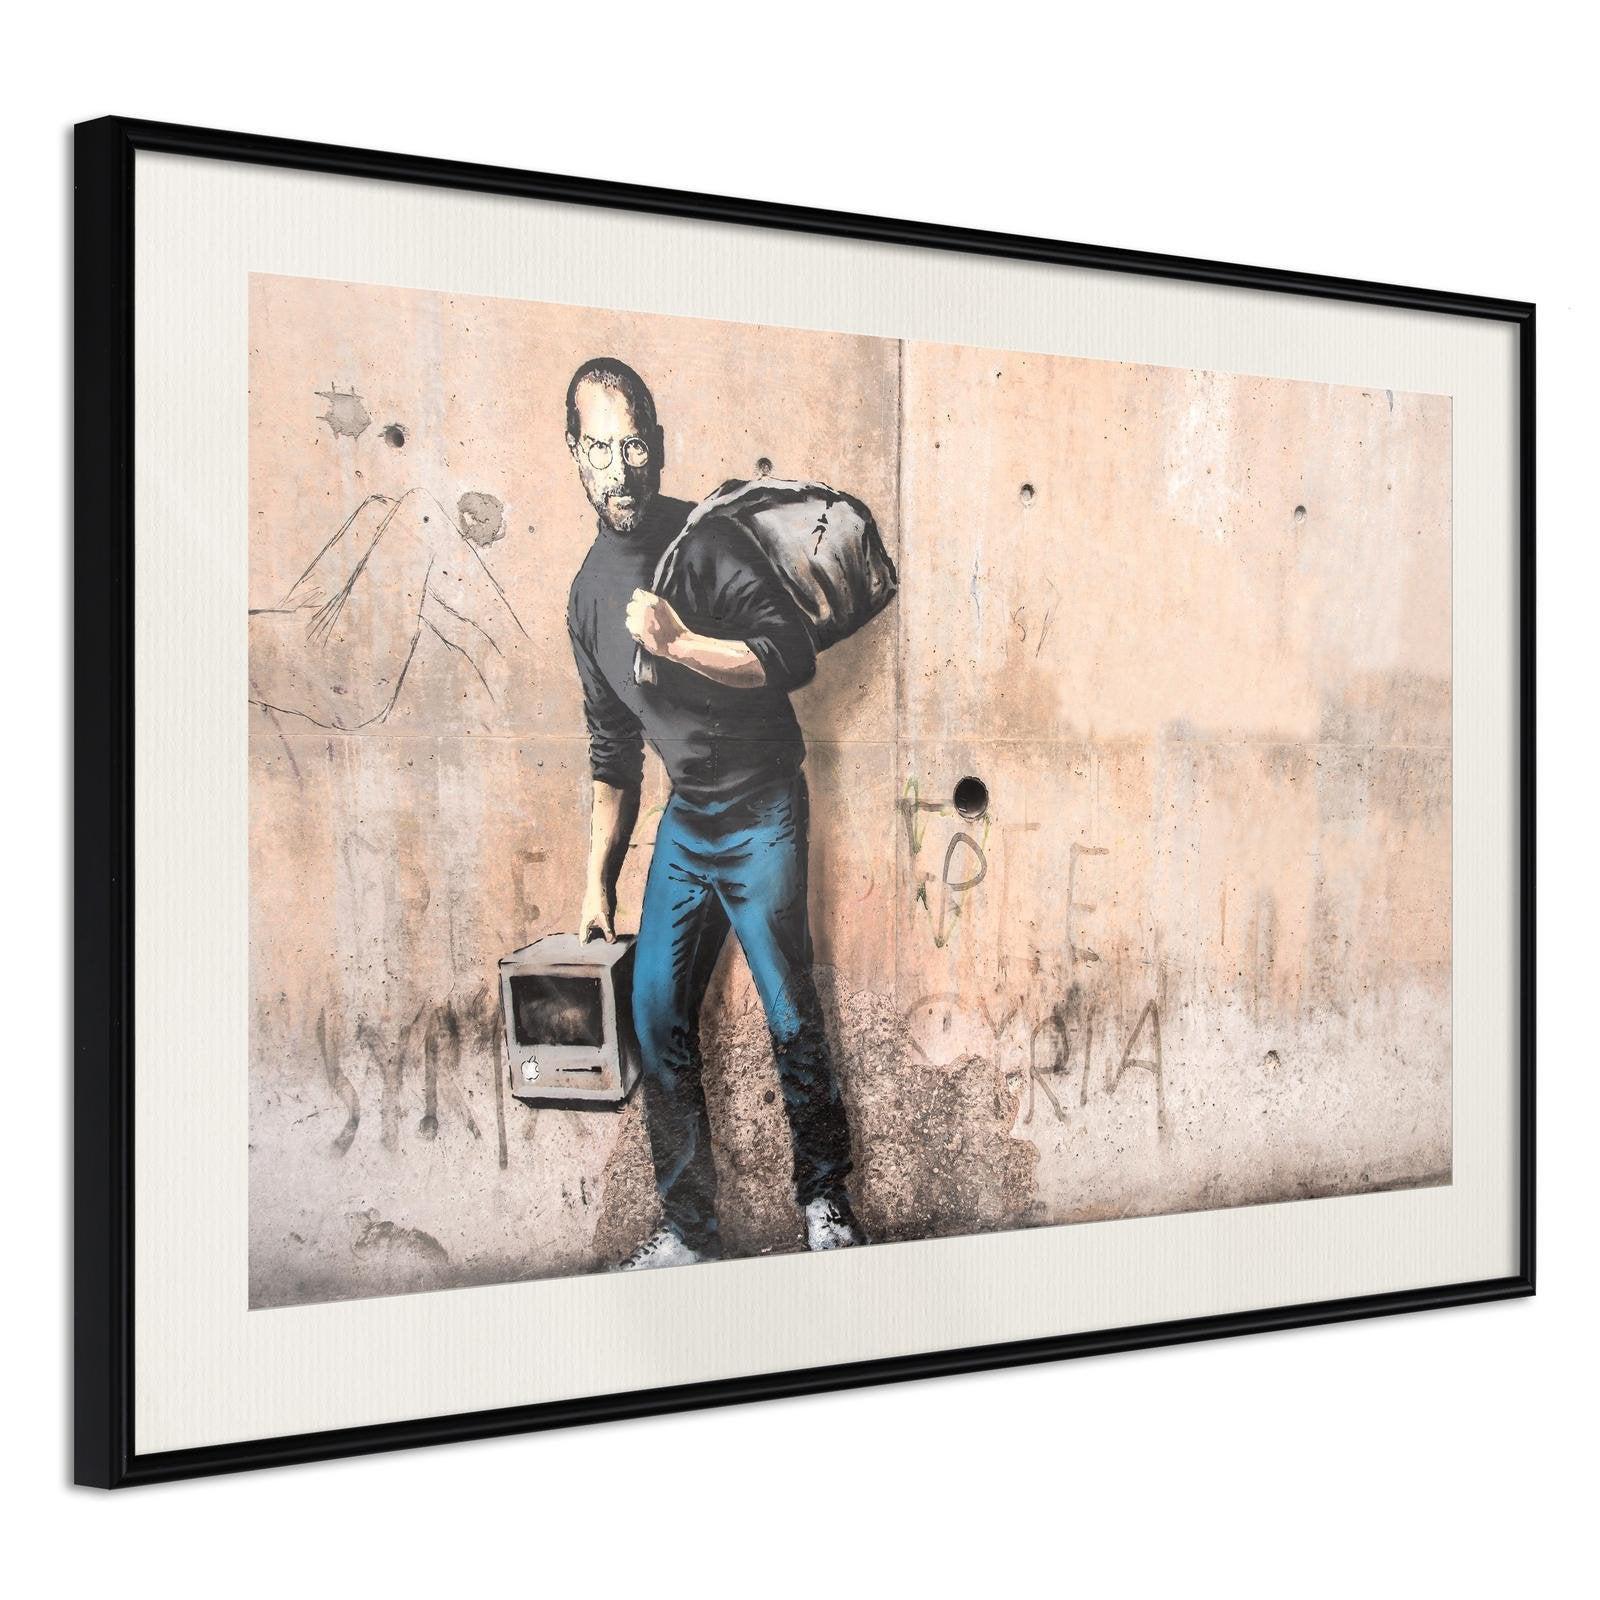 Inramad Poster / Tavla - Banksy: The Son of a Migrant from Syria-Poster Inramad-Artgeist-30x20-Svart ram med passepartout-peaceofhome.se